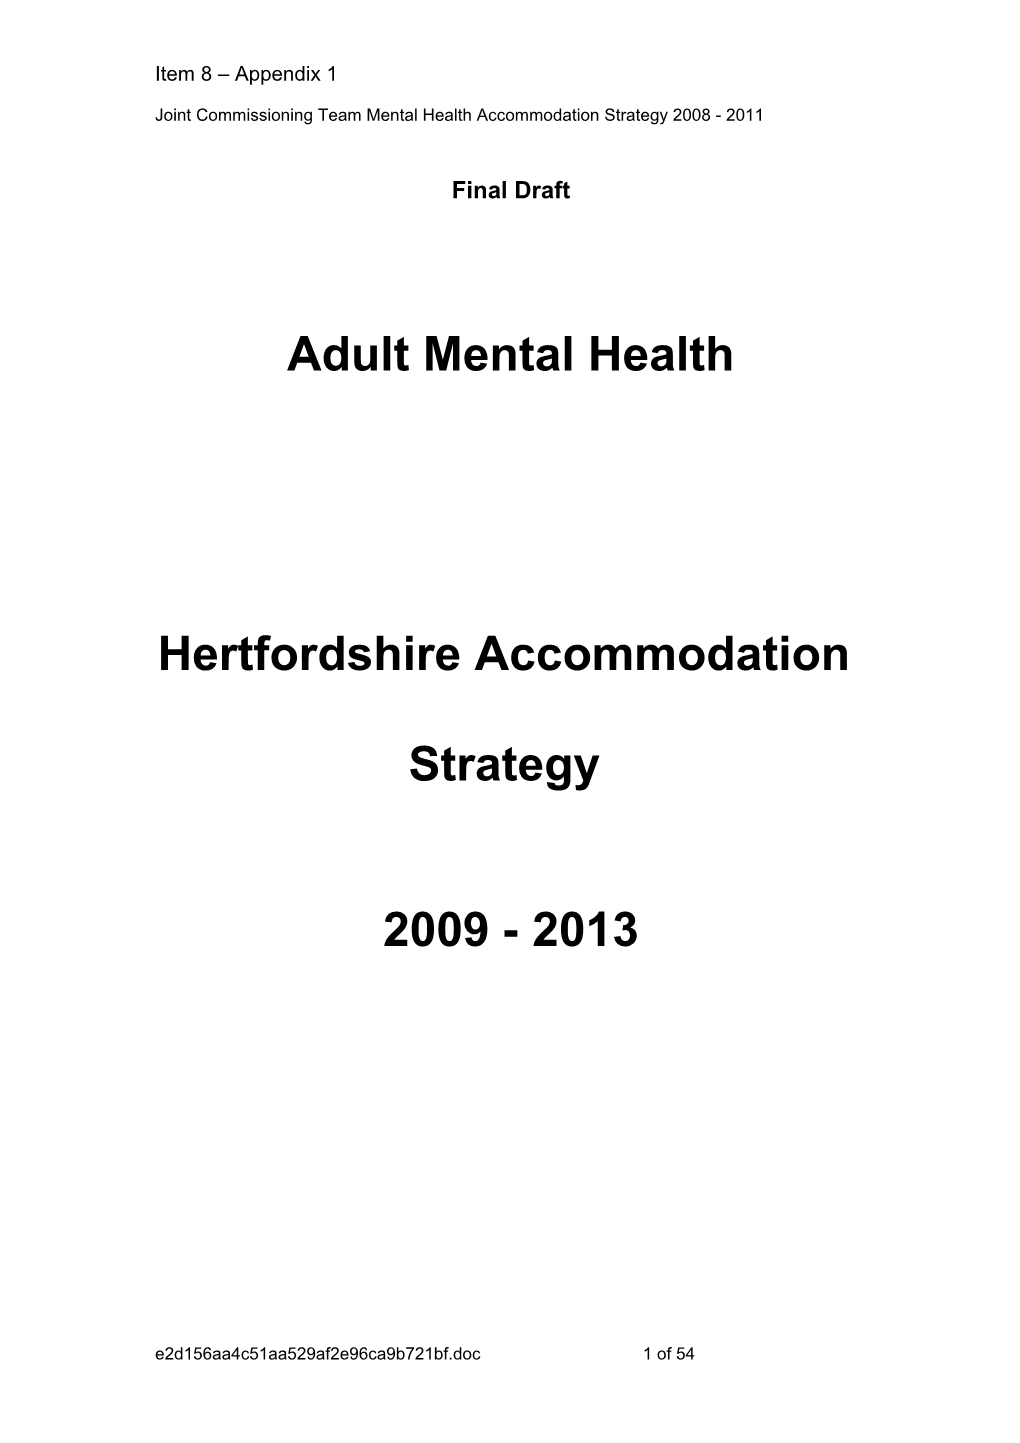 Adult Mental Health Accommodation Strategy